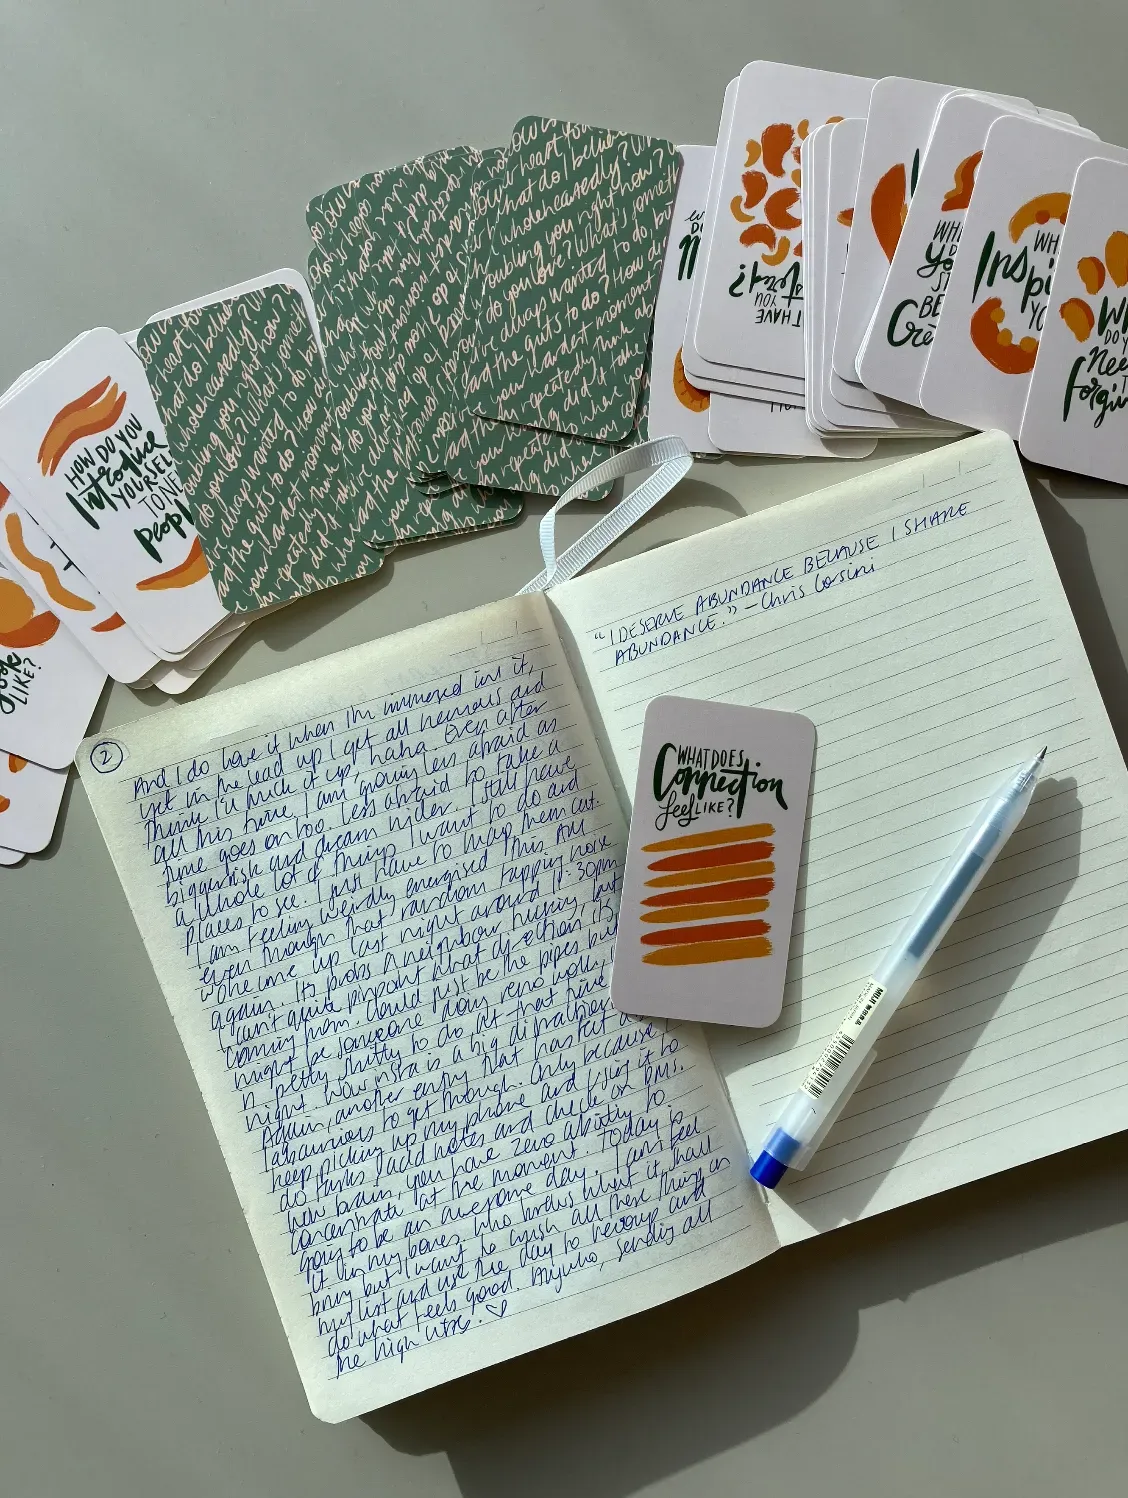 expression deck cards helps with journaling